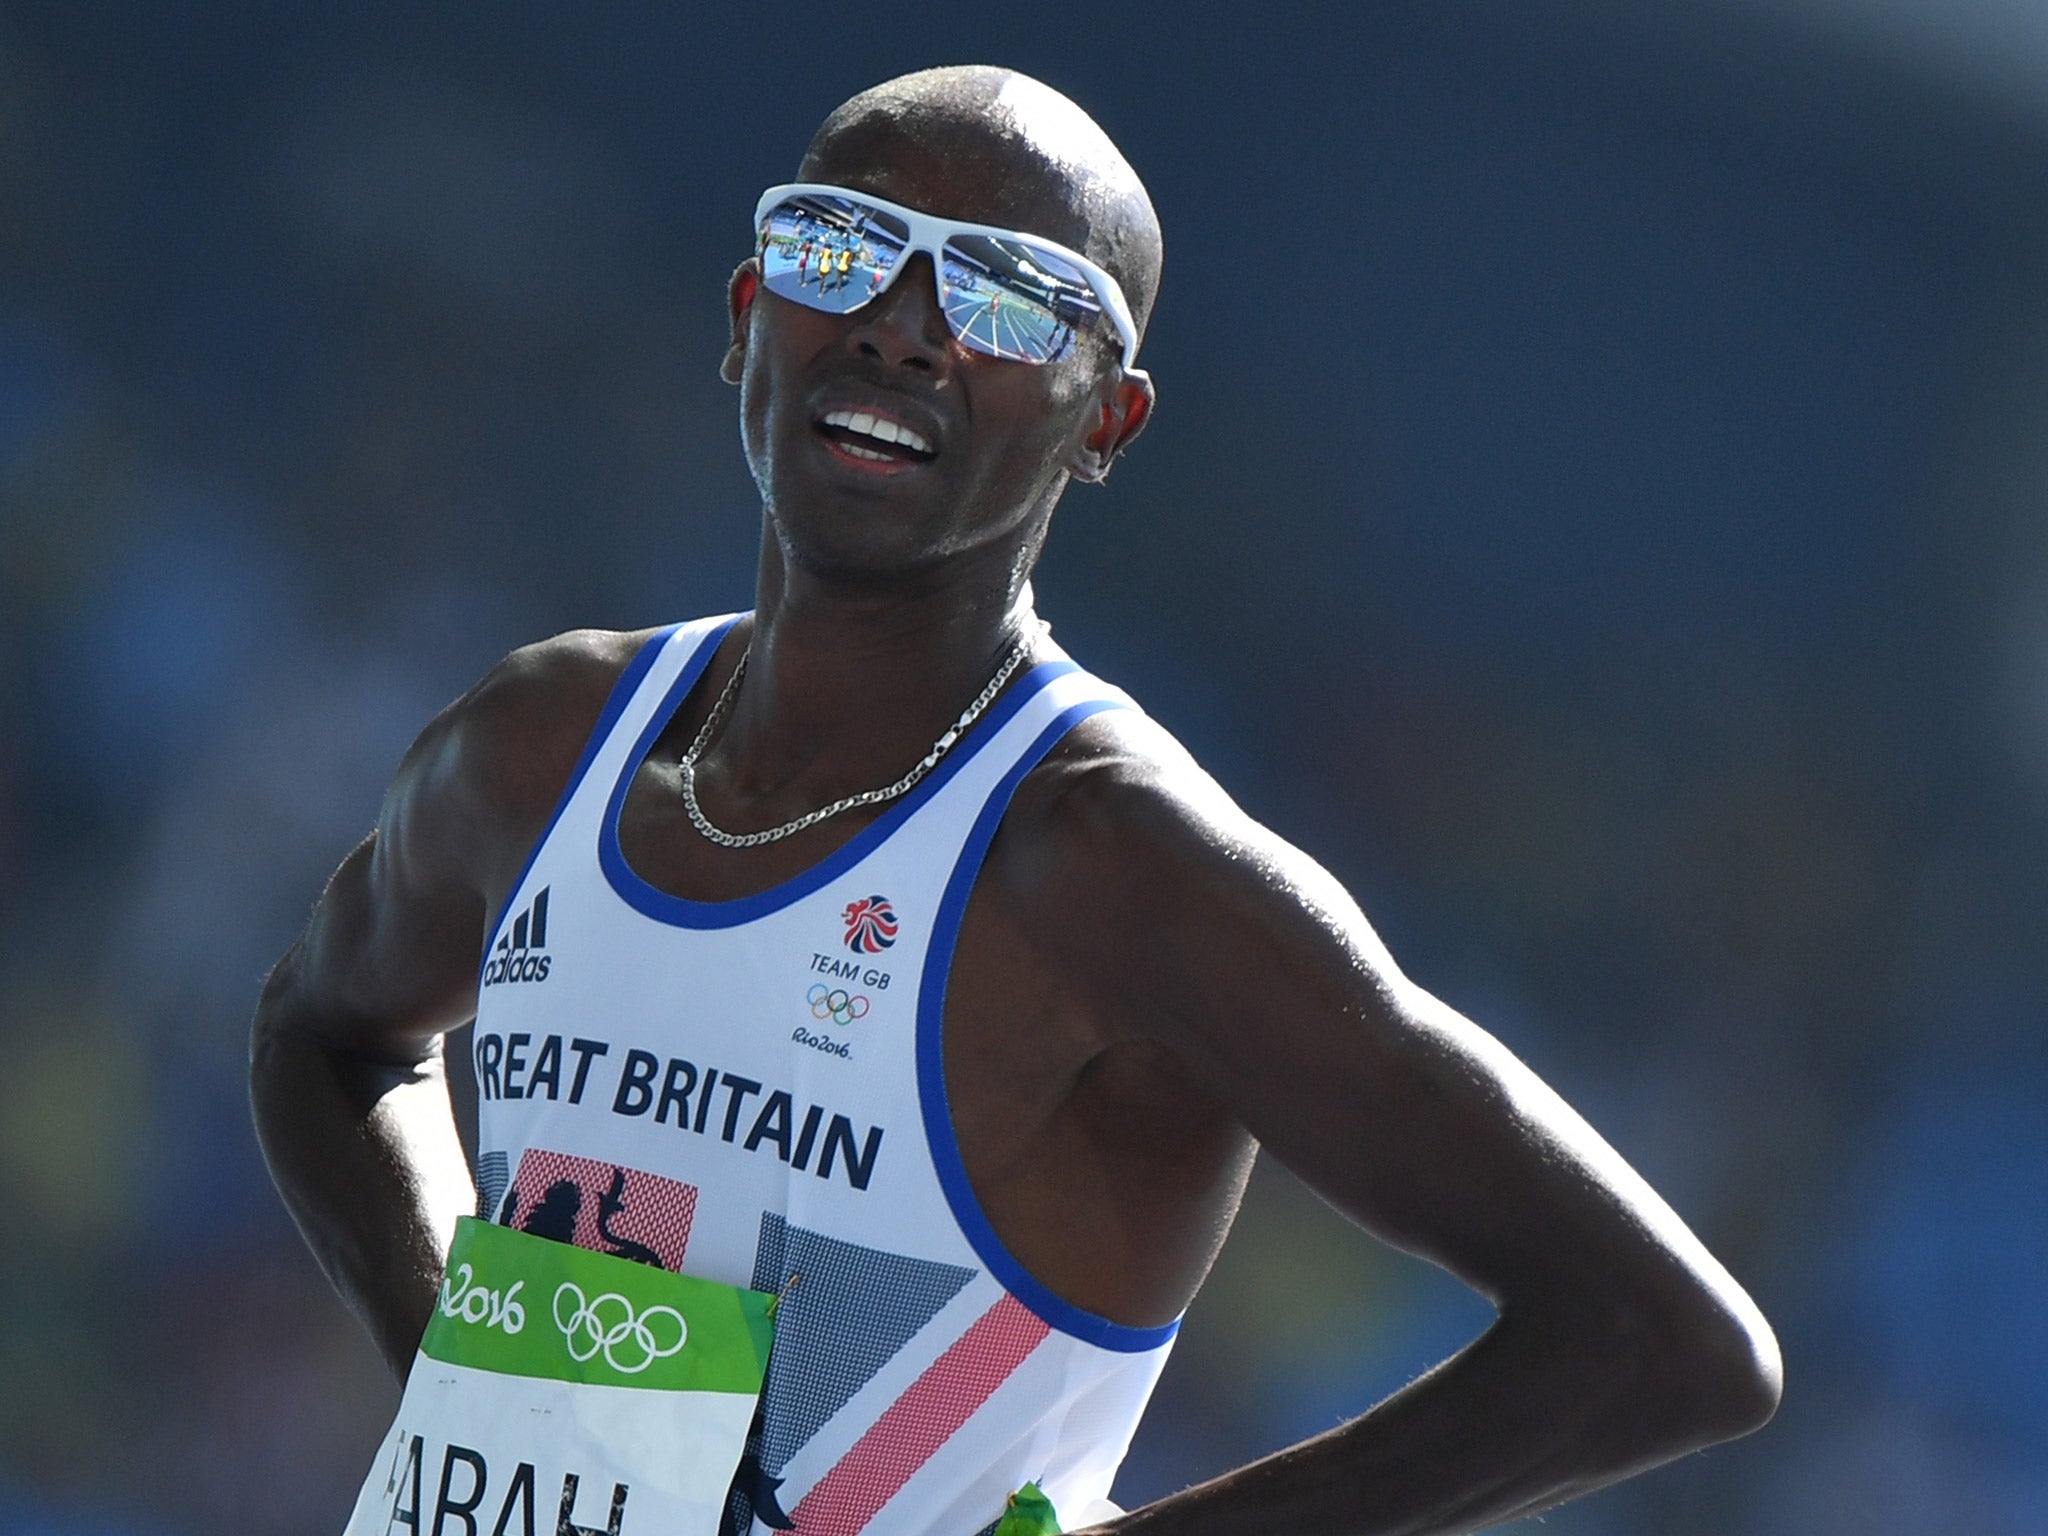 Mo Farah faces the biggest challenge of his career in the 5,000m at the Rio Olympics